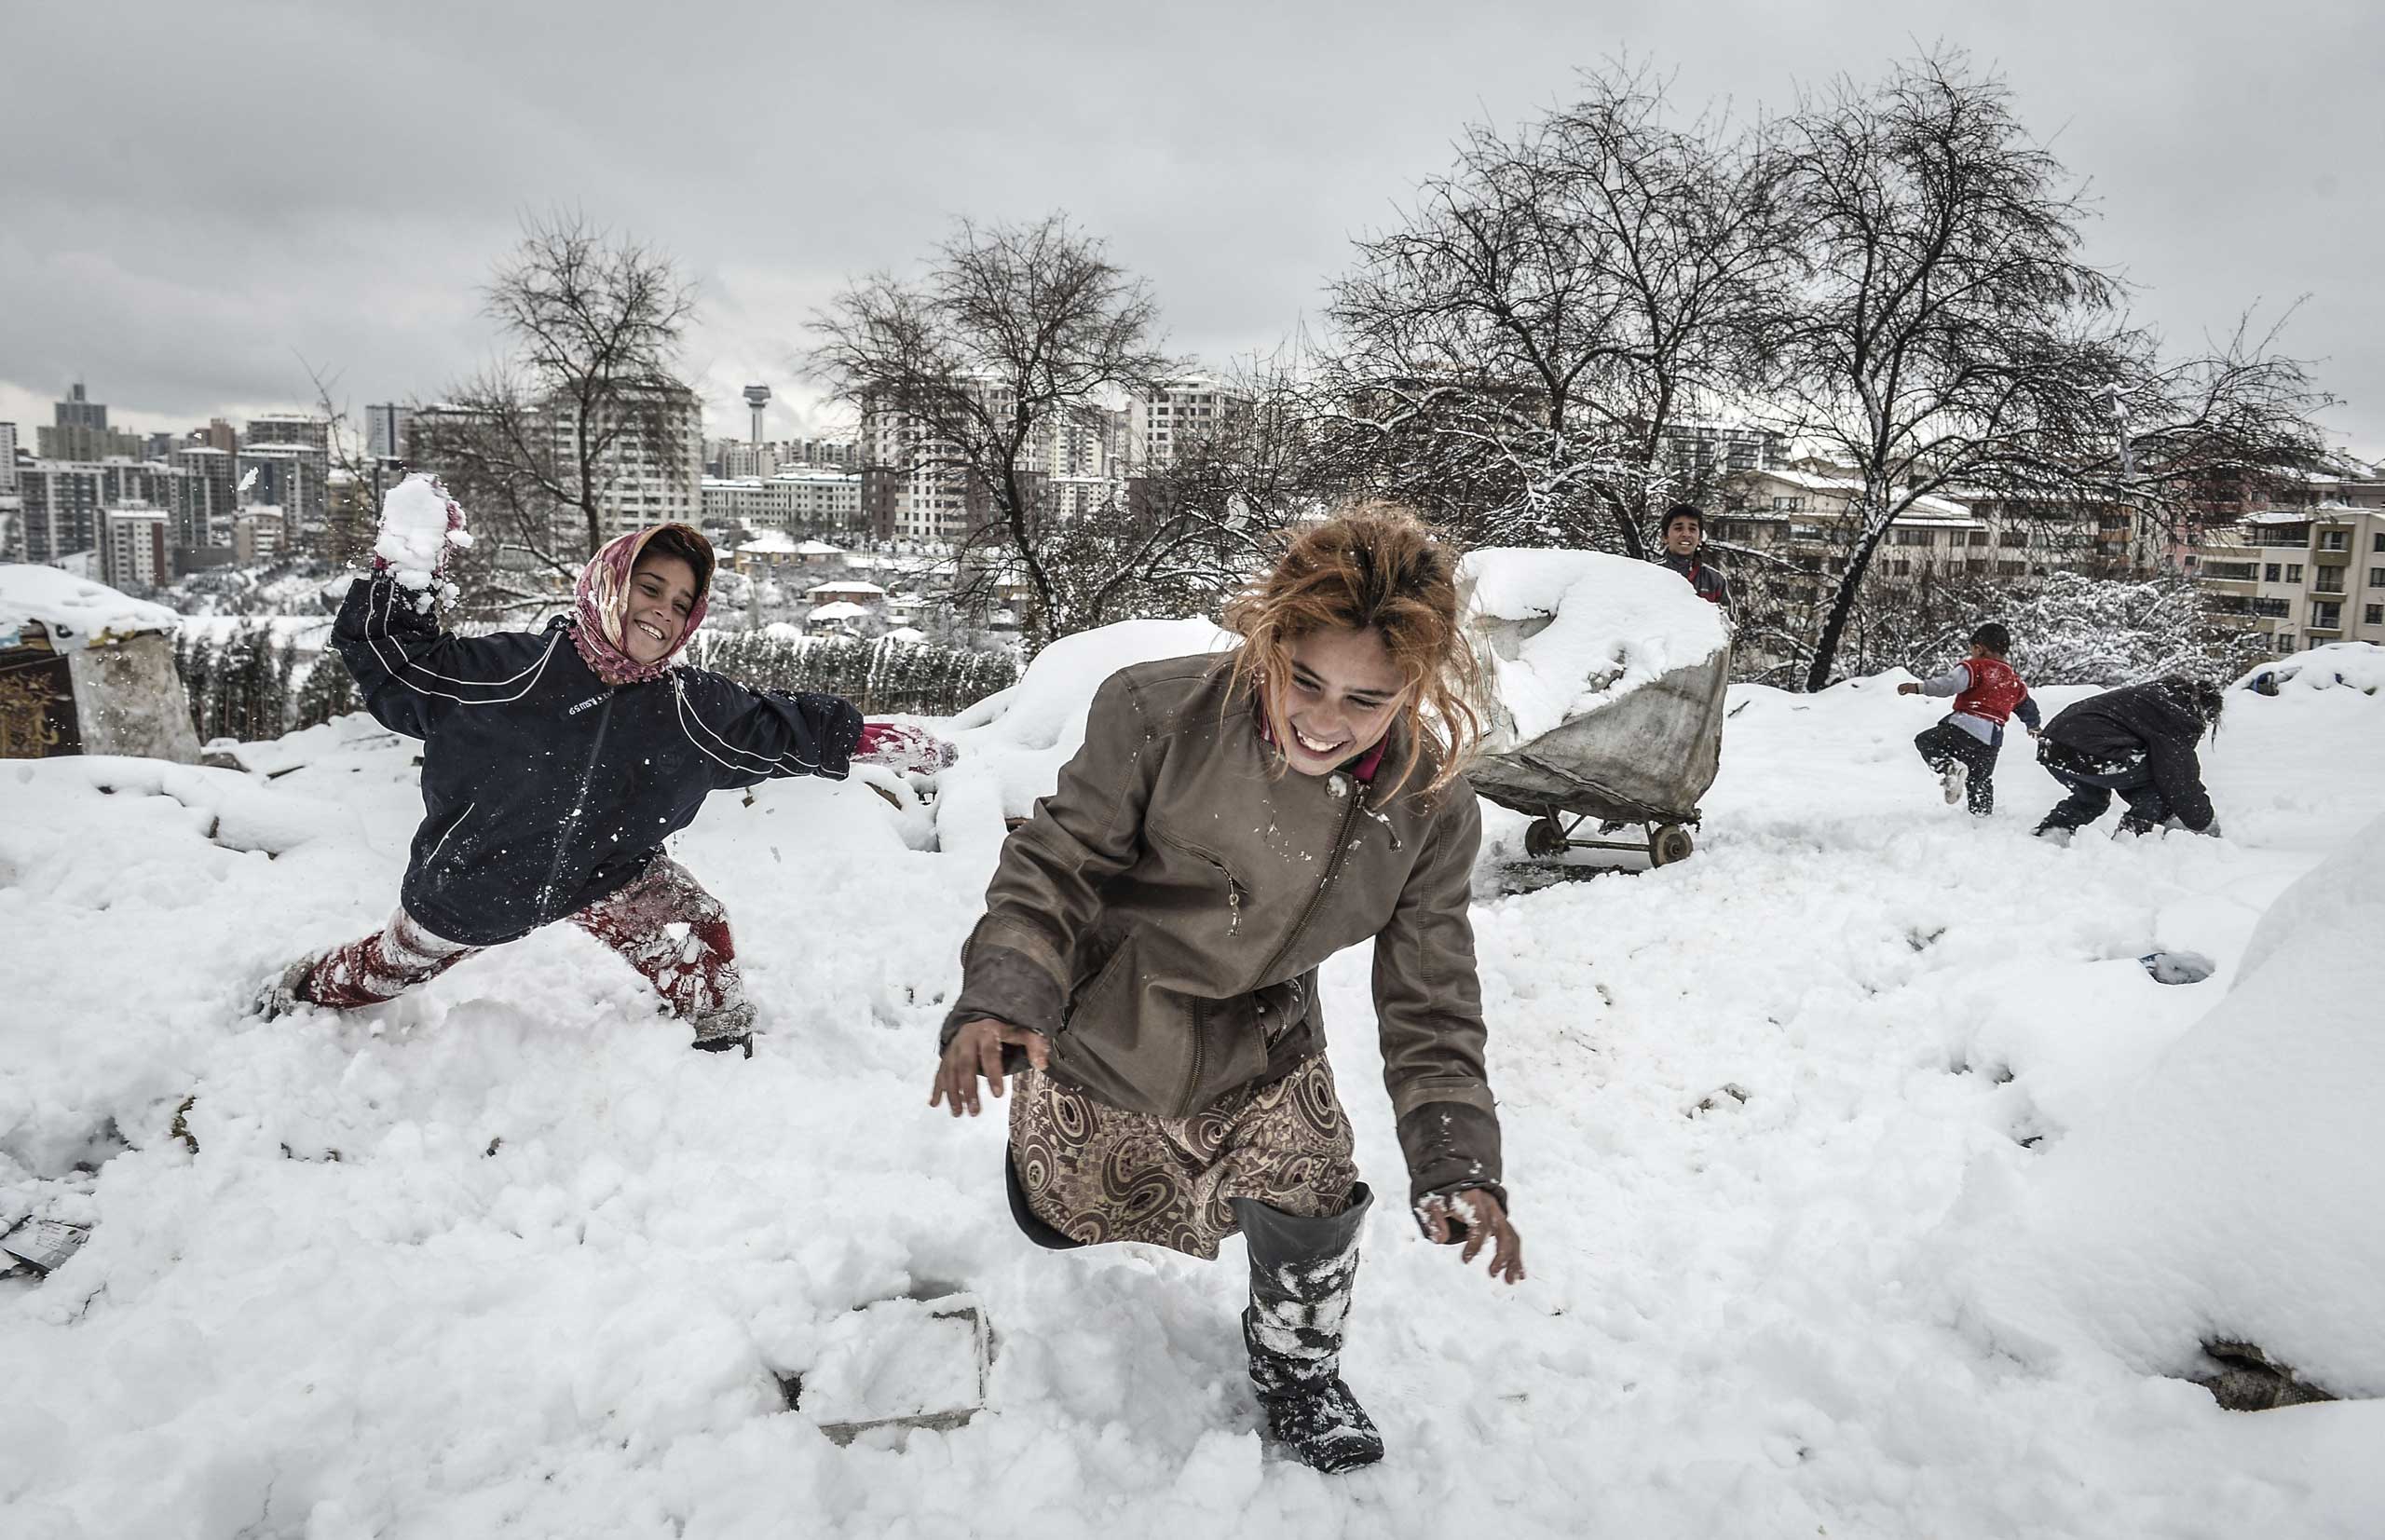 Feb. 11, 2015. Syrian kids, fled with their families from attacks of ISIS, play with snow, in front of a hovel as they live in harsh conditions in cold winter time in Turkey's capital Ankara's suburbs.